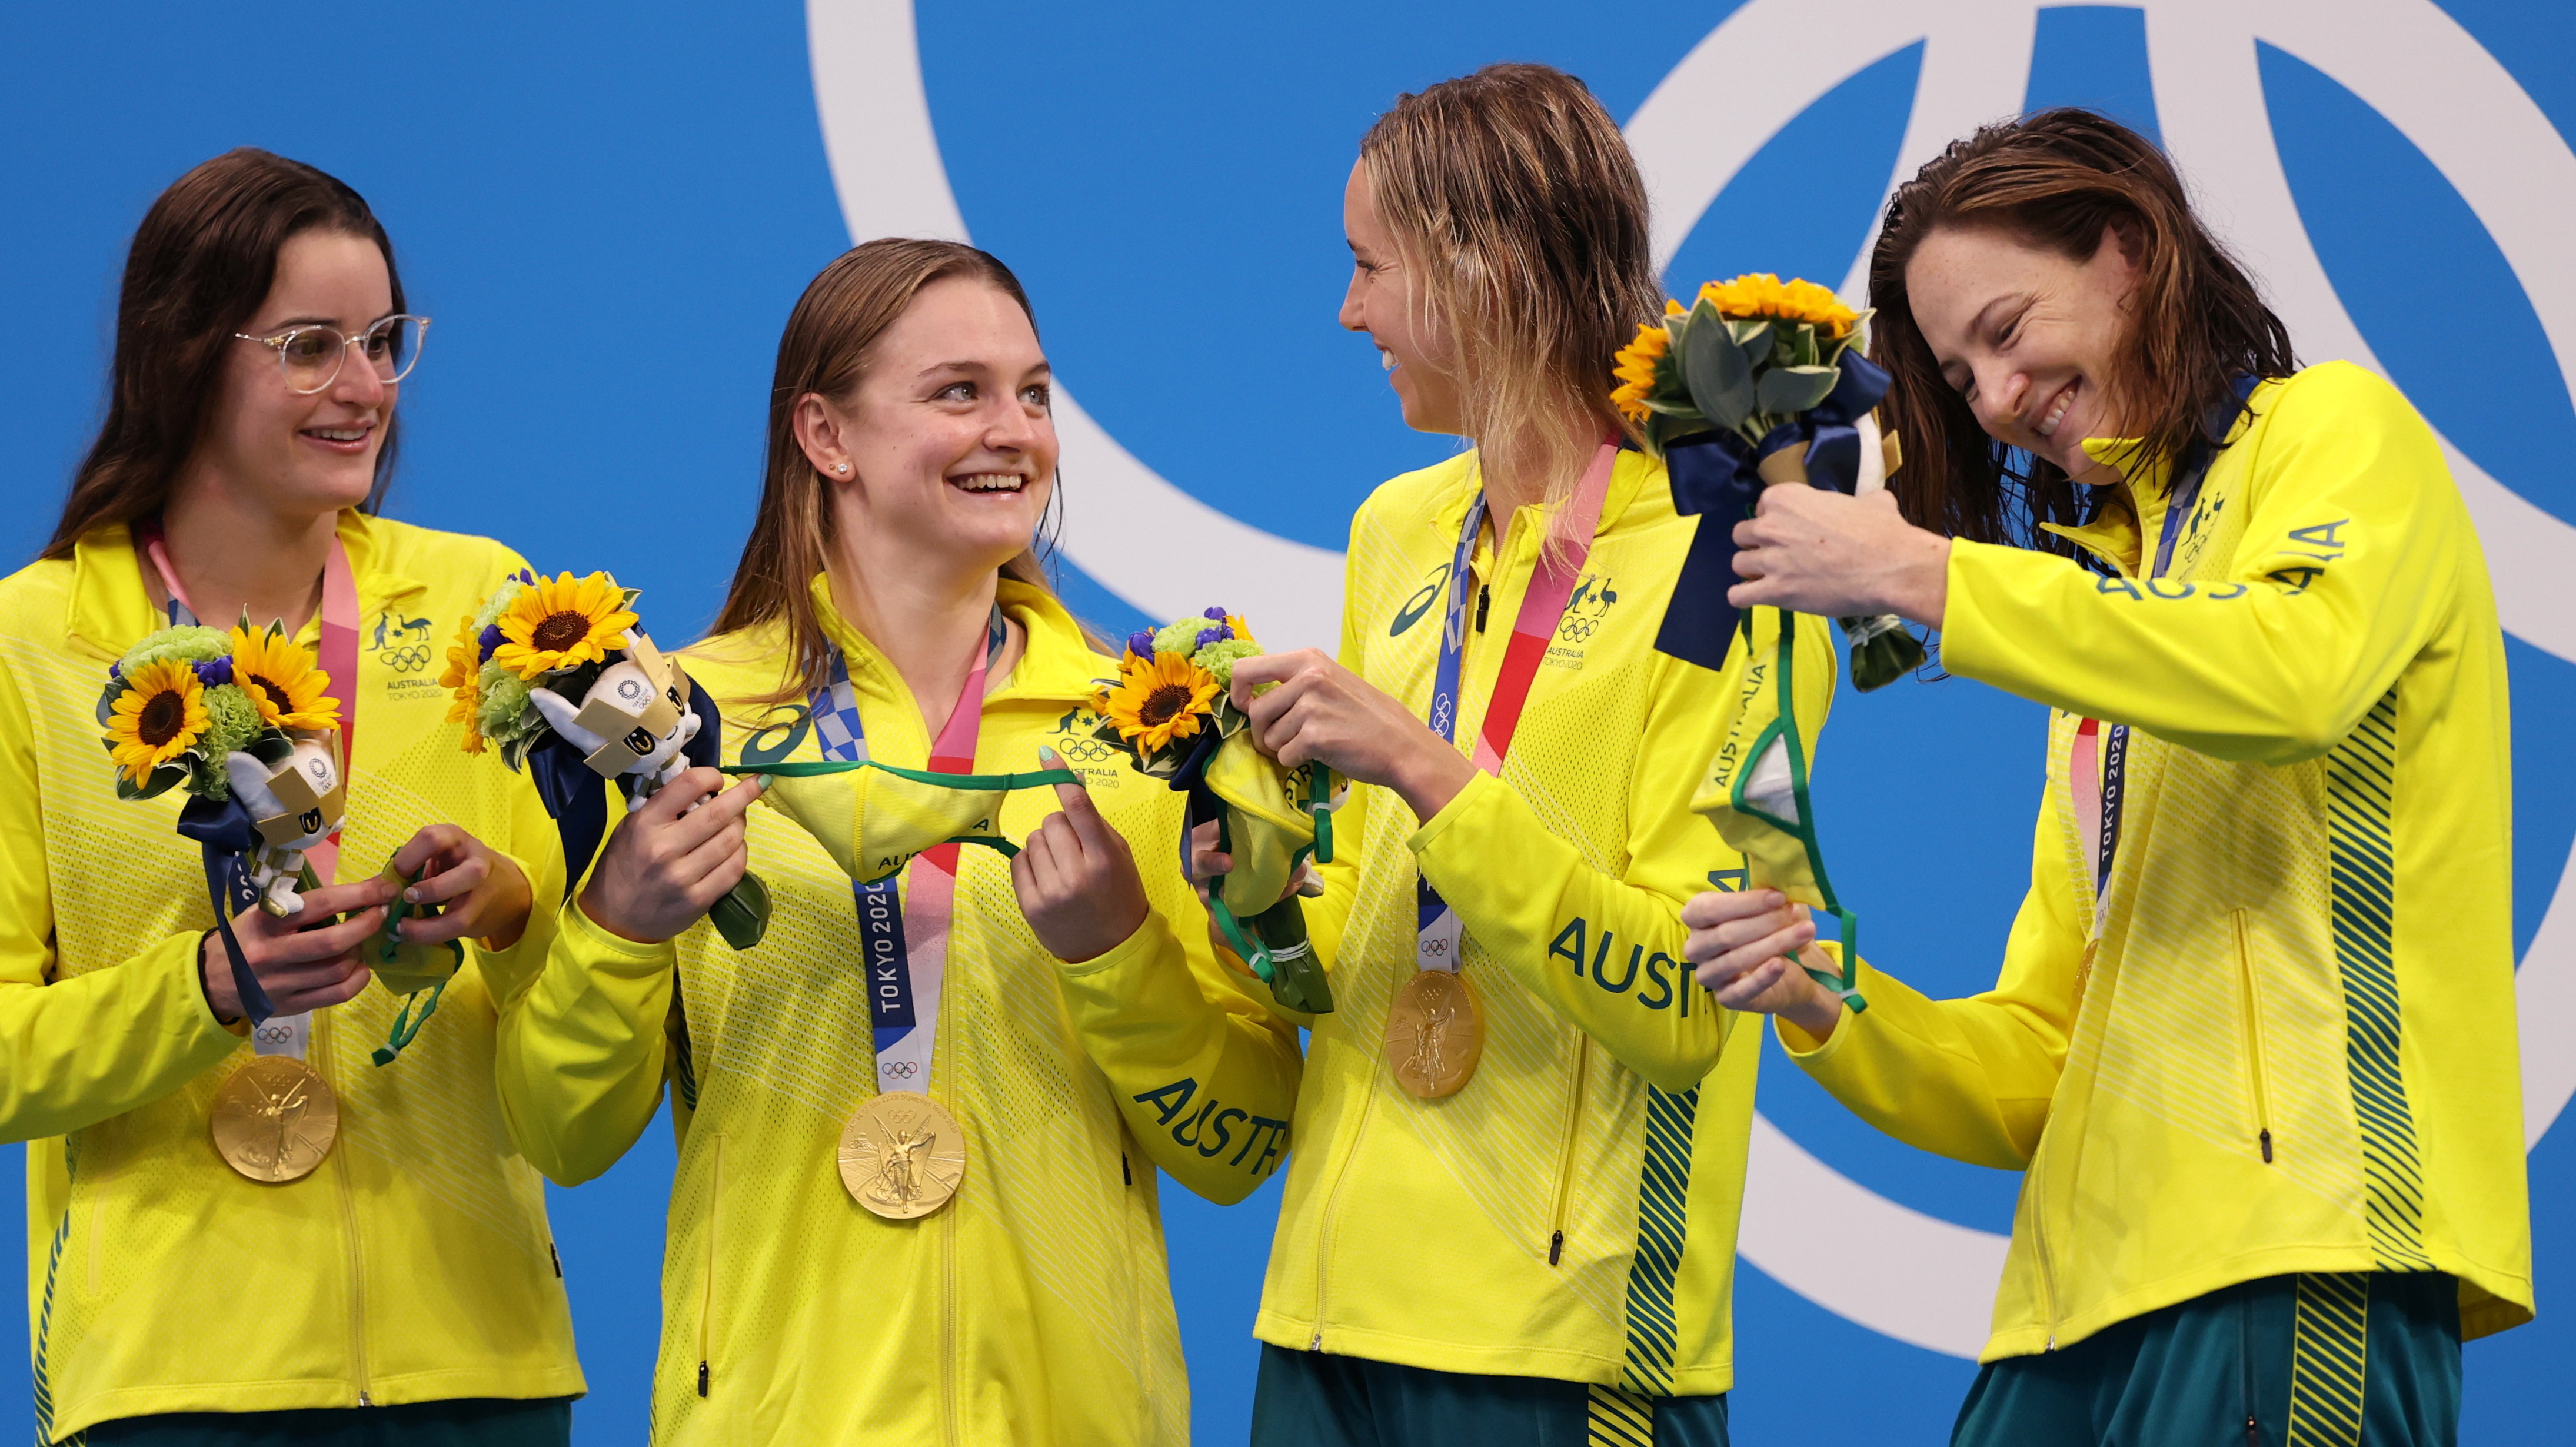 Swimming - Women's 4 x 100m Medley Relay - Medal Ceremony